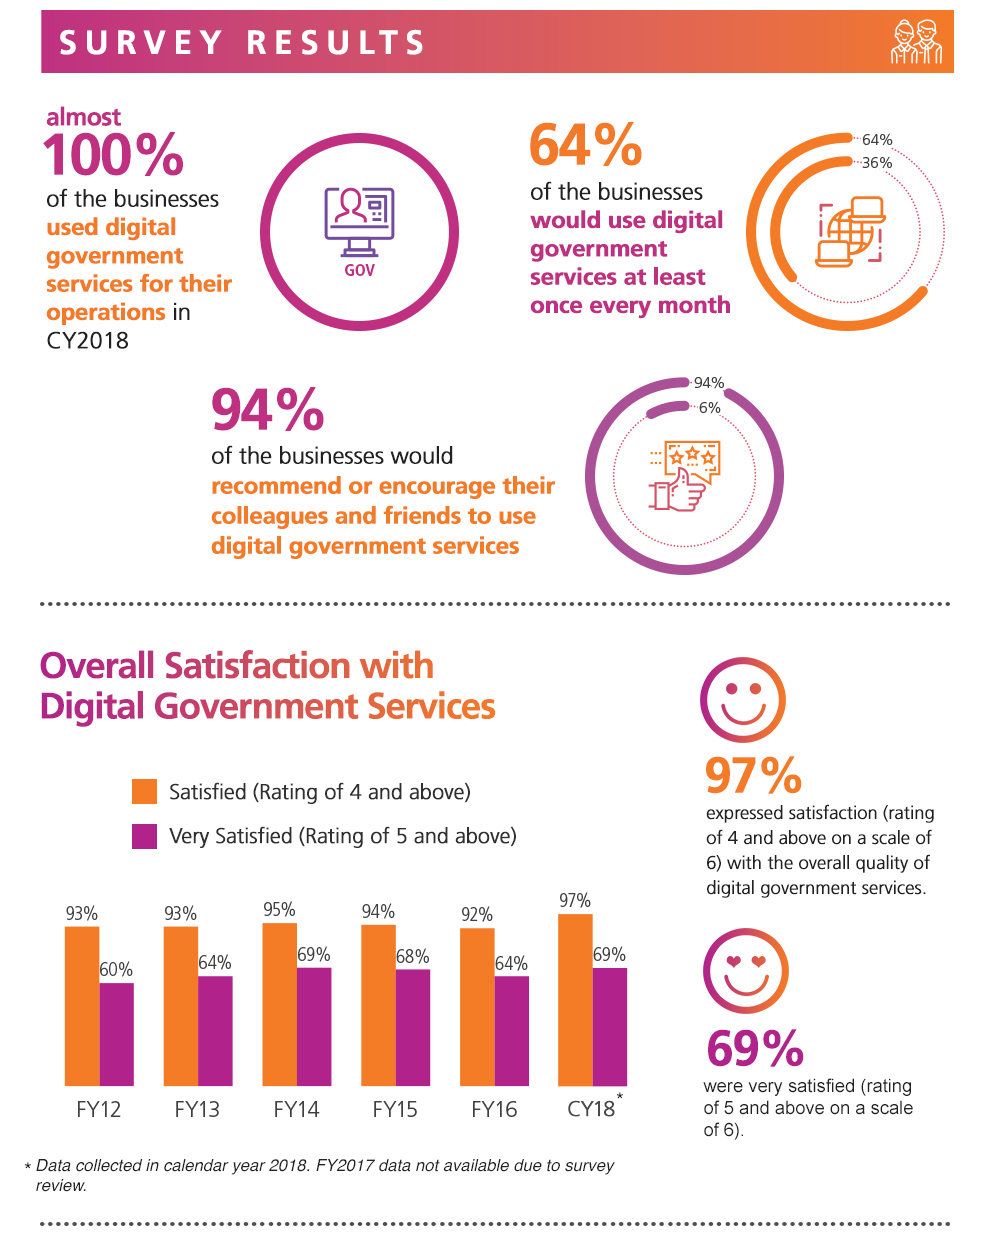 Digital Government Perception Survey 2018 for Businesses by GovTech